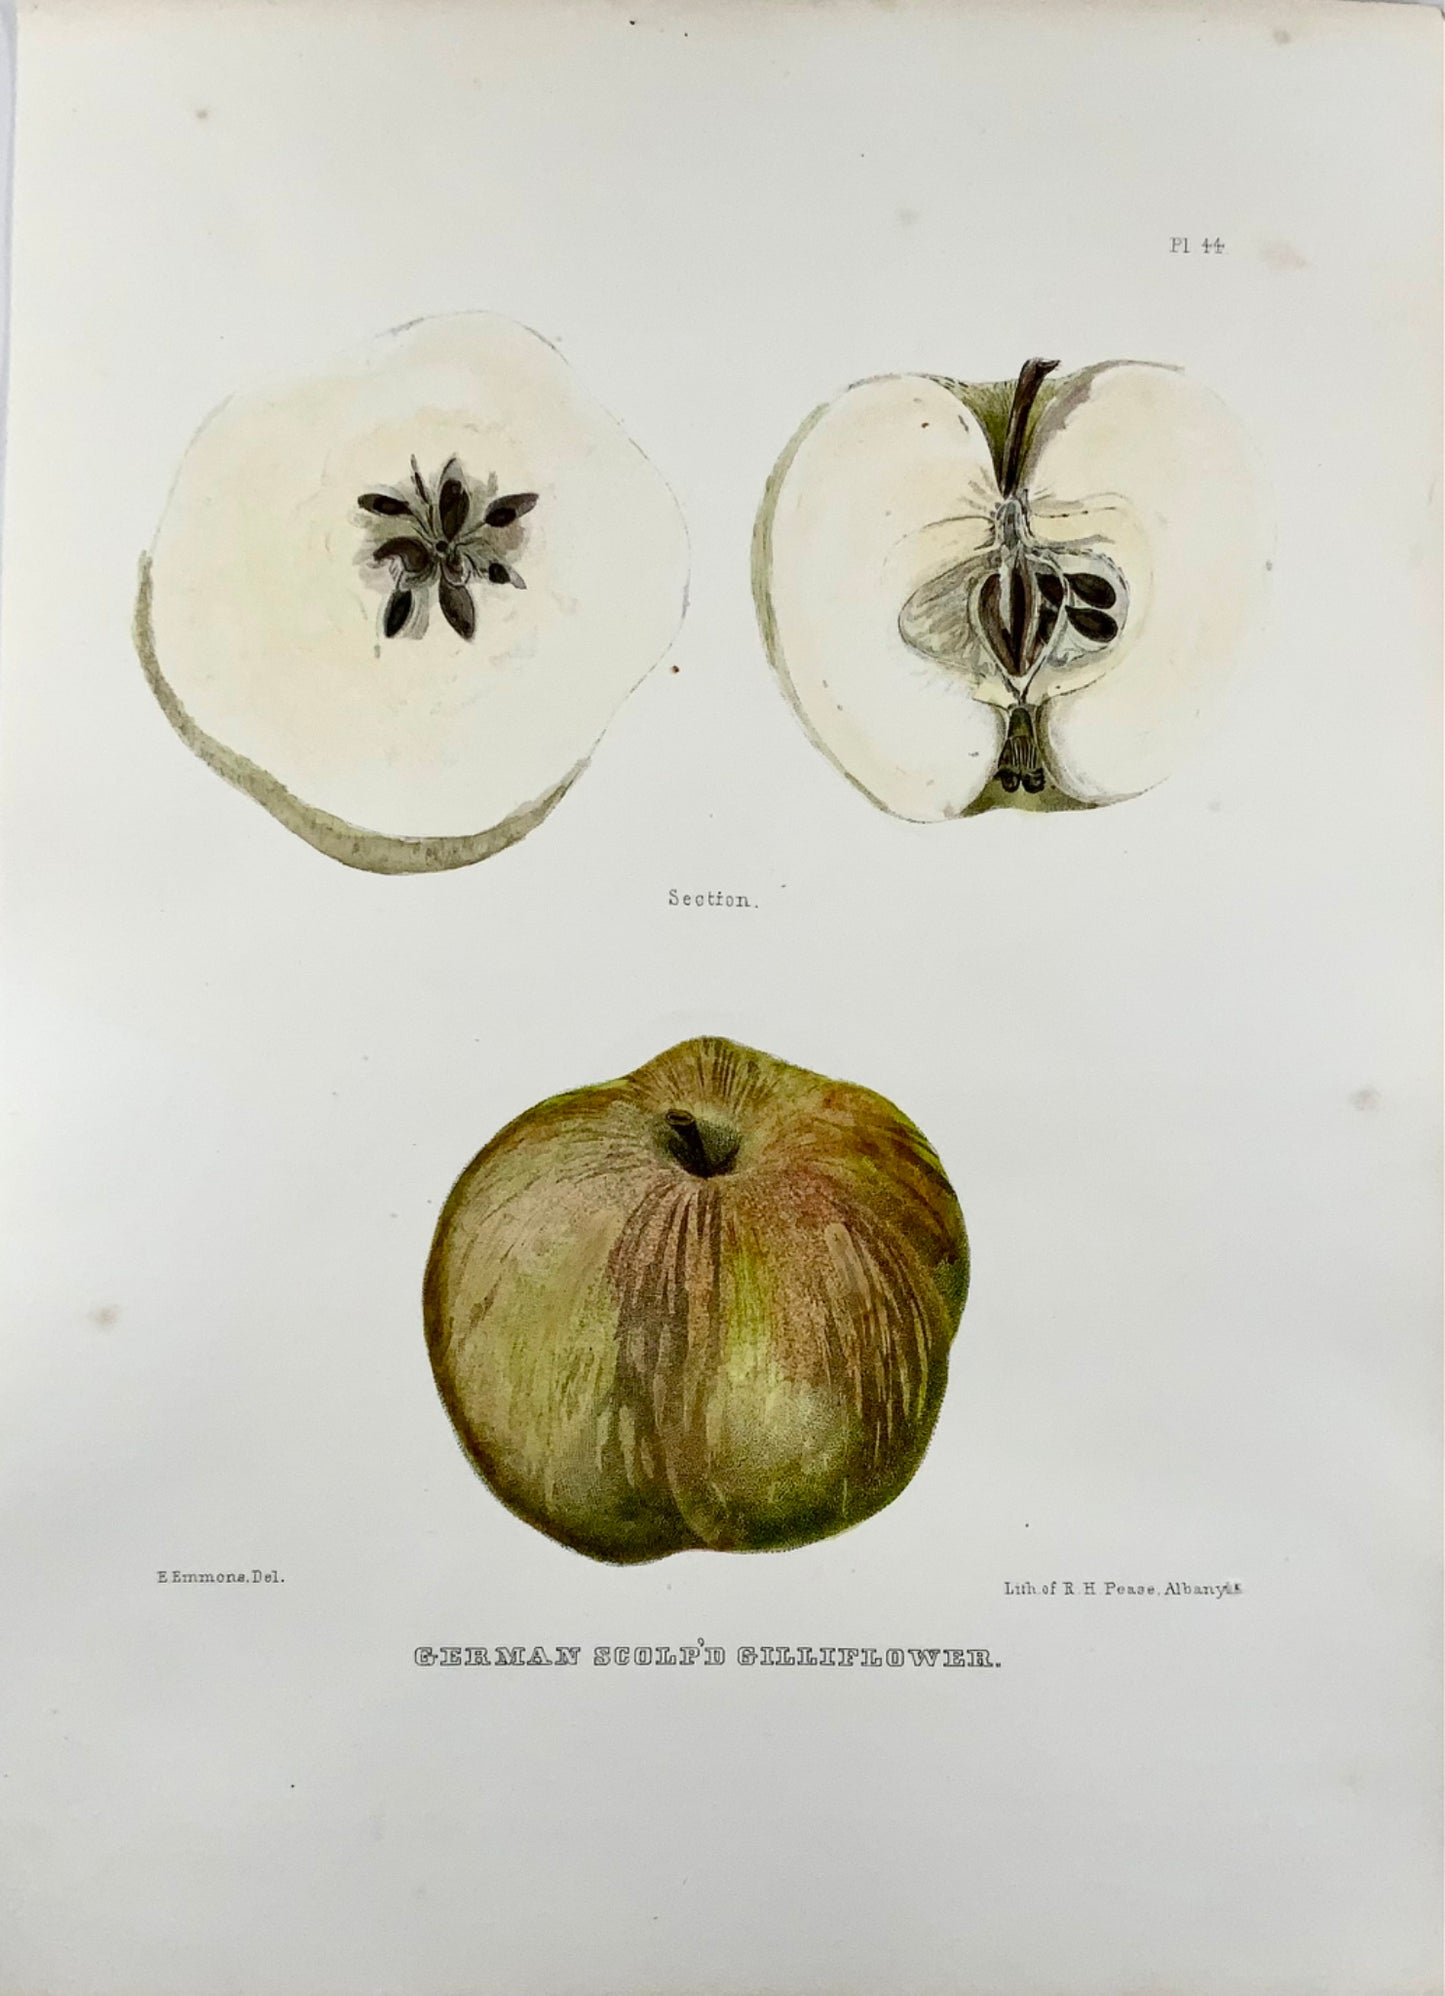 1830 c Pease lith; Emmons - Fruit: Apple German - hand coloured stone lithograph - Botany